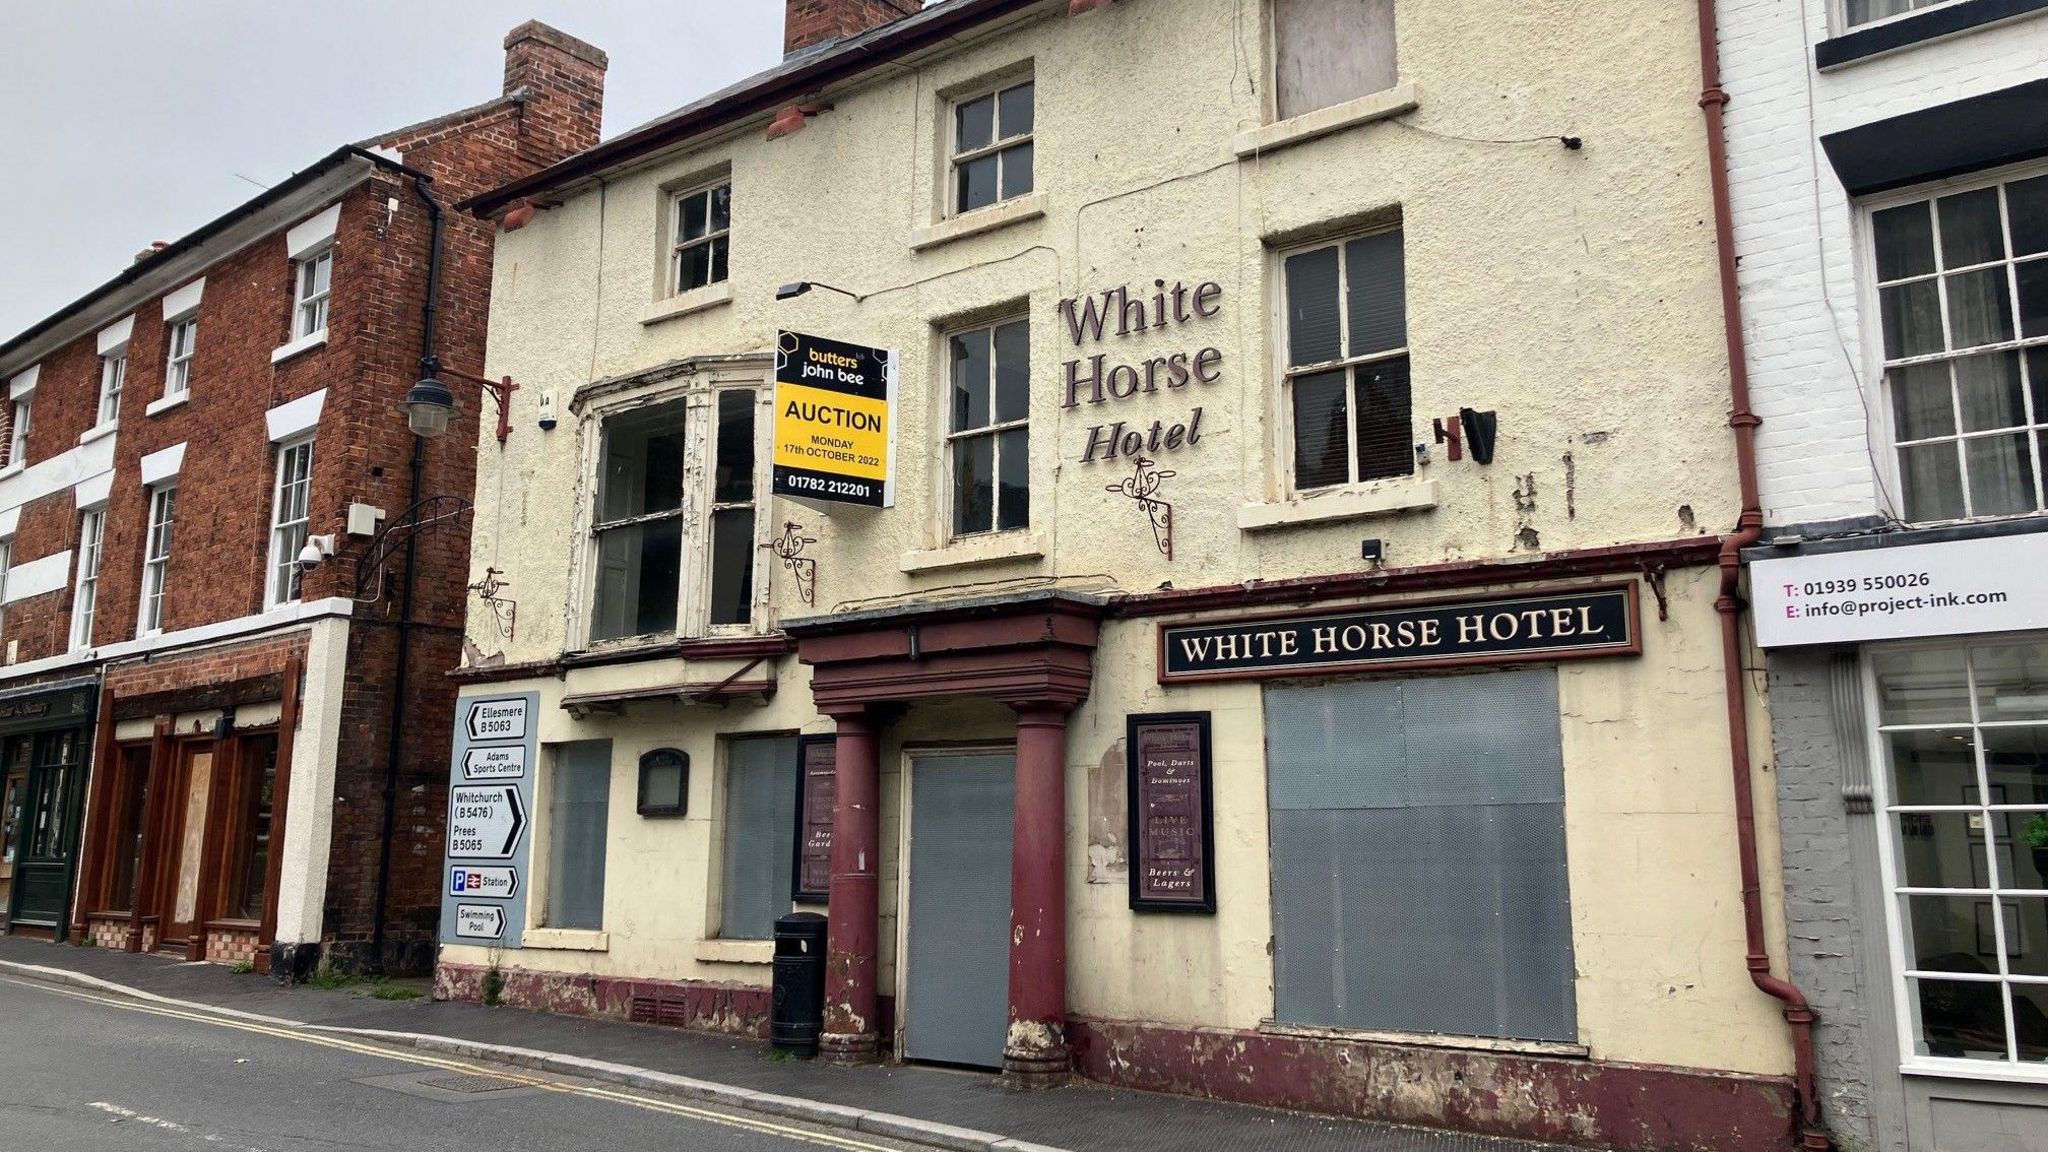 The White Horse Hotel in Wem